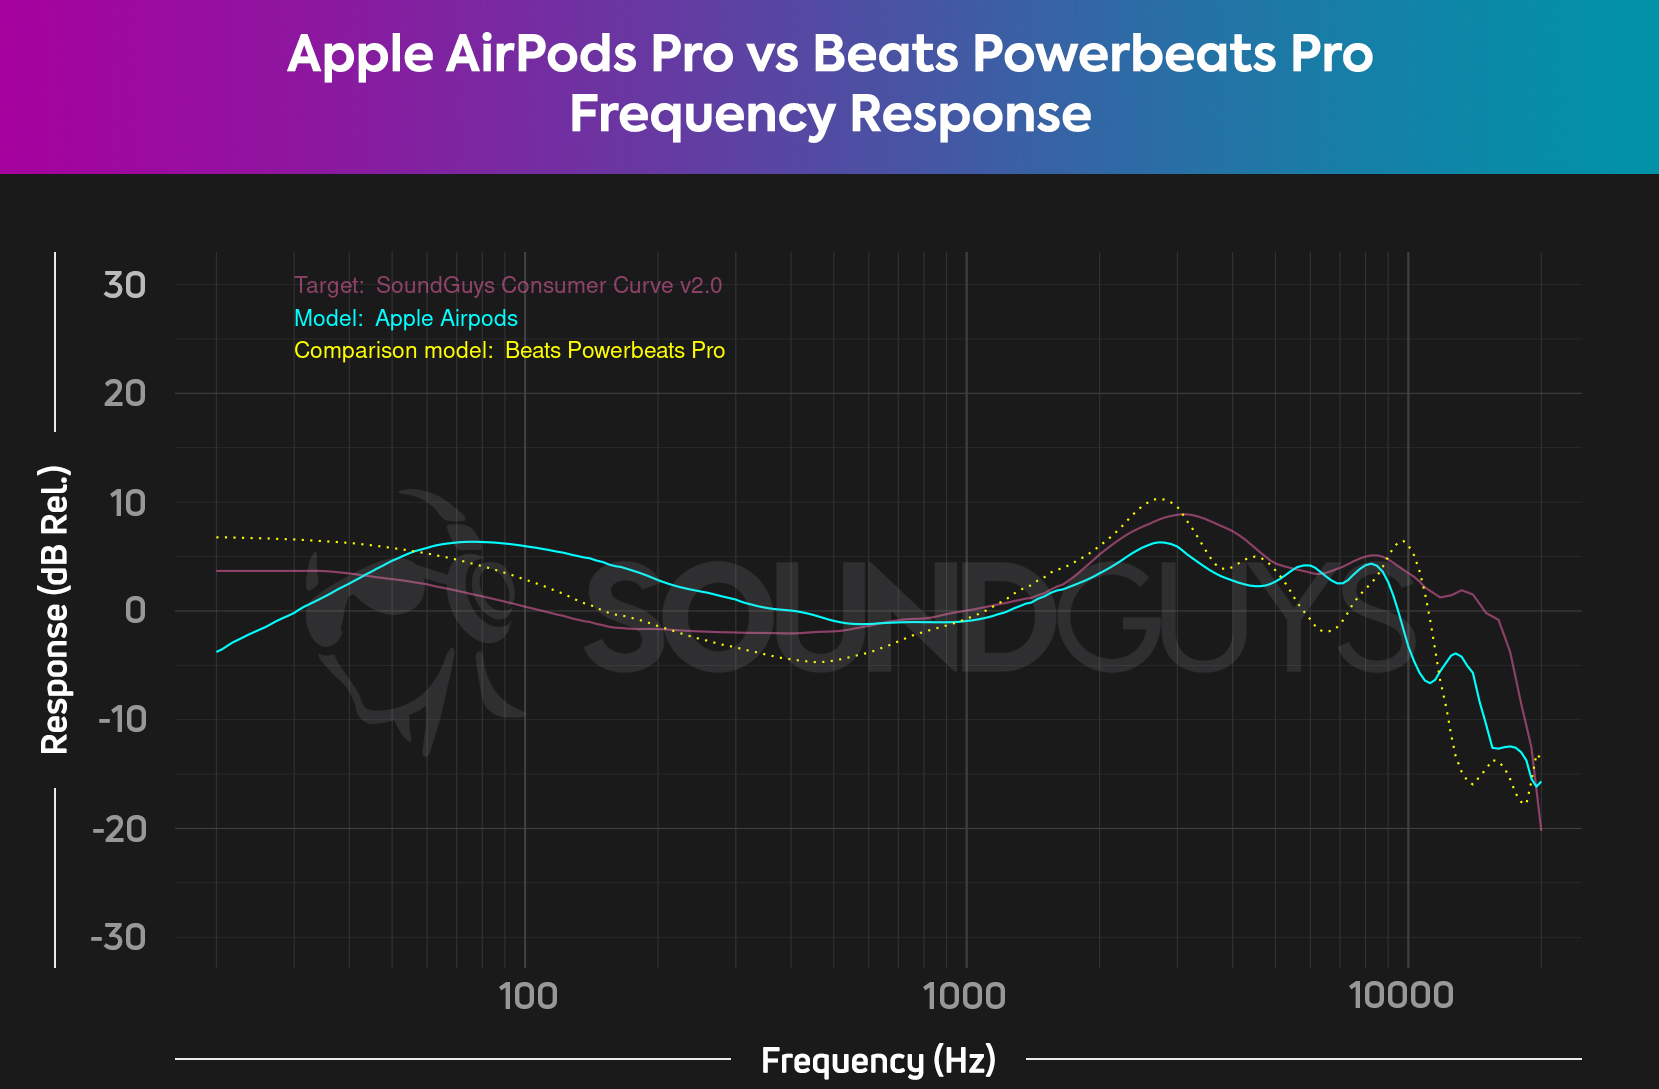 Apple AirPods (2nd gen) vs Beats Powerbeats Pro frequency response chart. Both headsets generally follow the shape of the house curve, but the AirPods (2nd gen) places greater emphasis on bass frequencies.